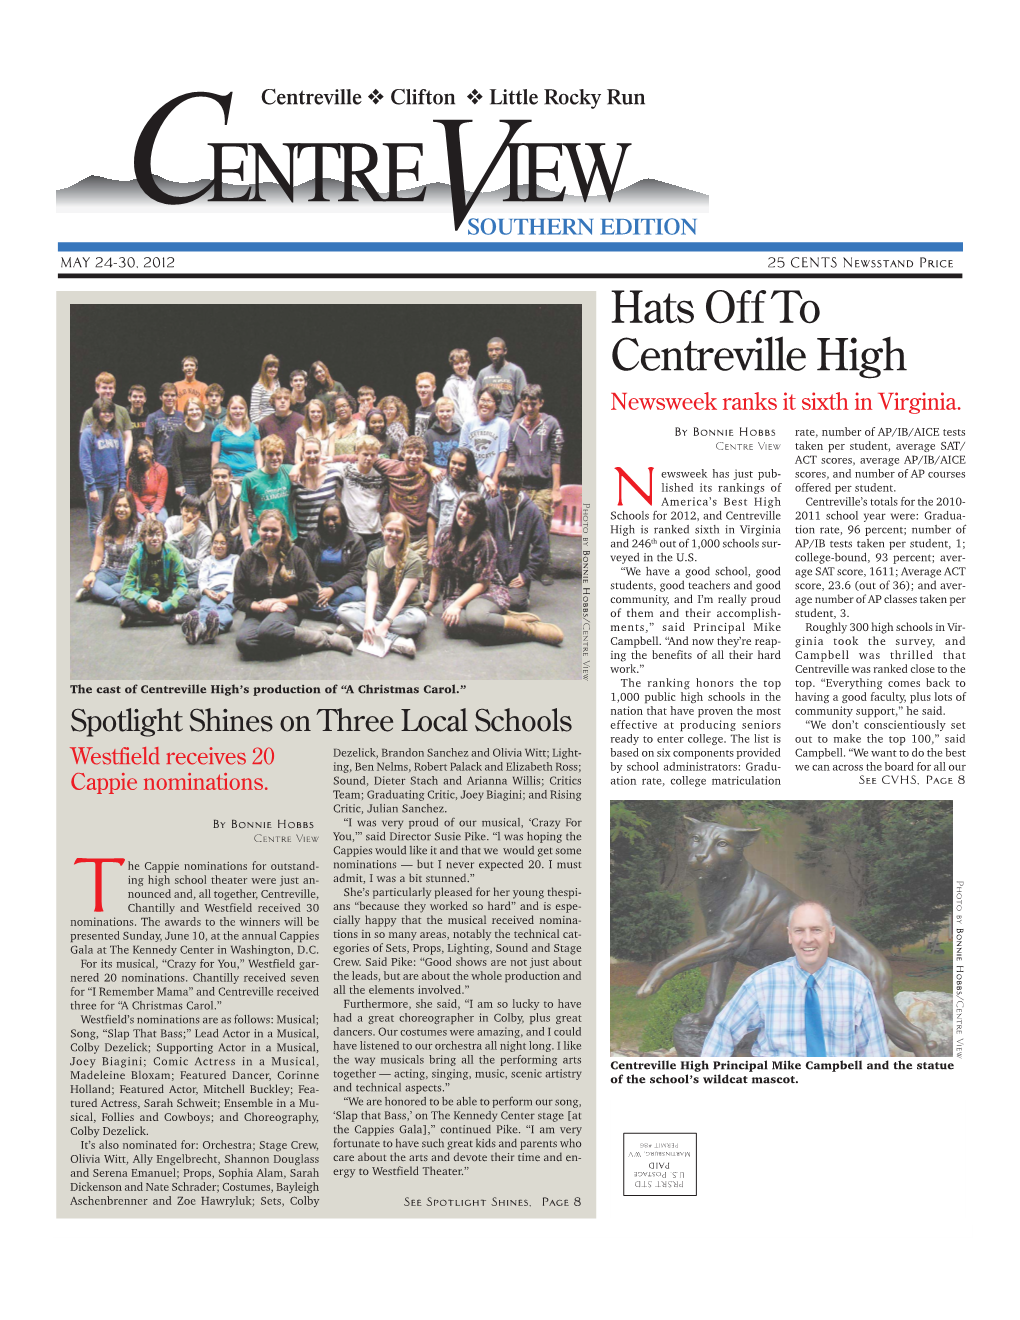 Hats Off to Centreville High Newsweek Ranks It Sixth in Virginia